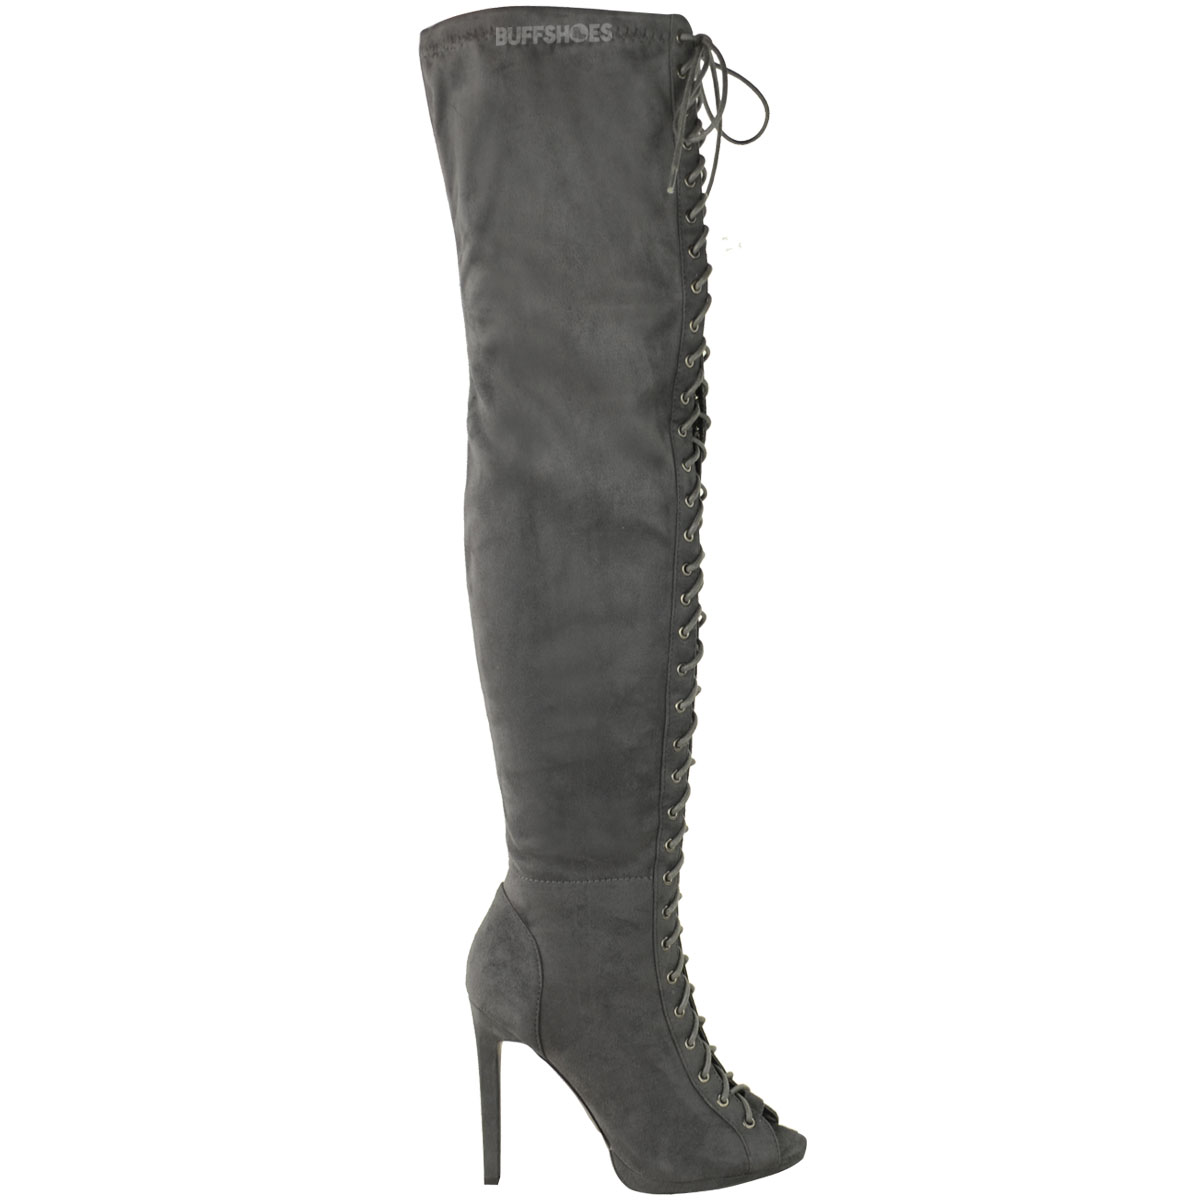 Womens Ladies Thigh High Over The Knee Platform Lace Up Boots Stiletto